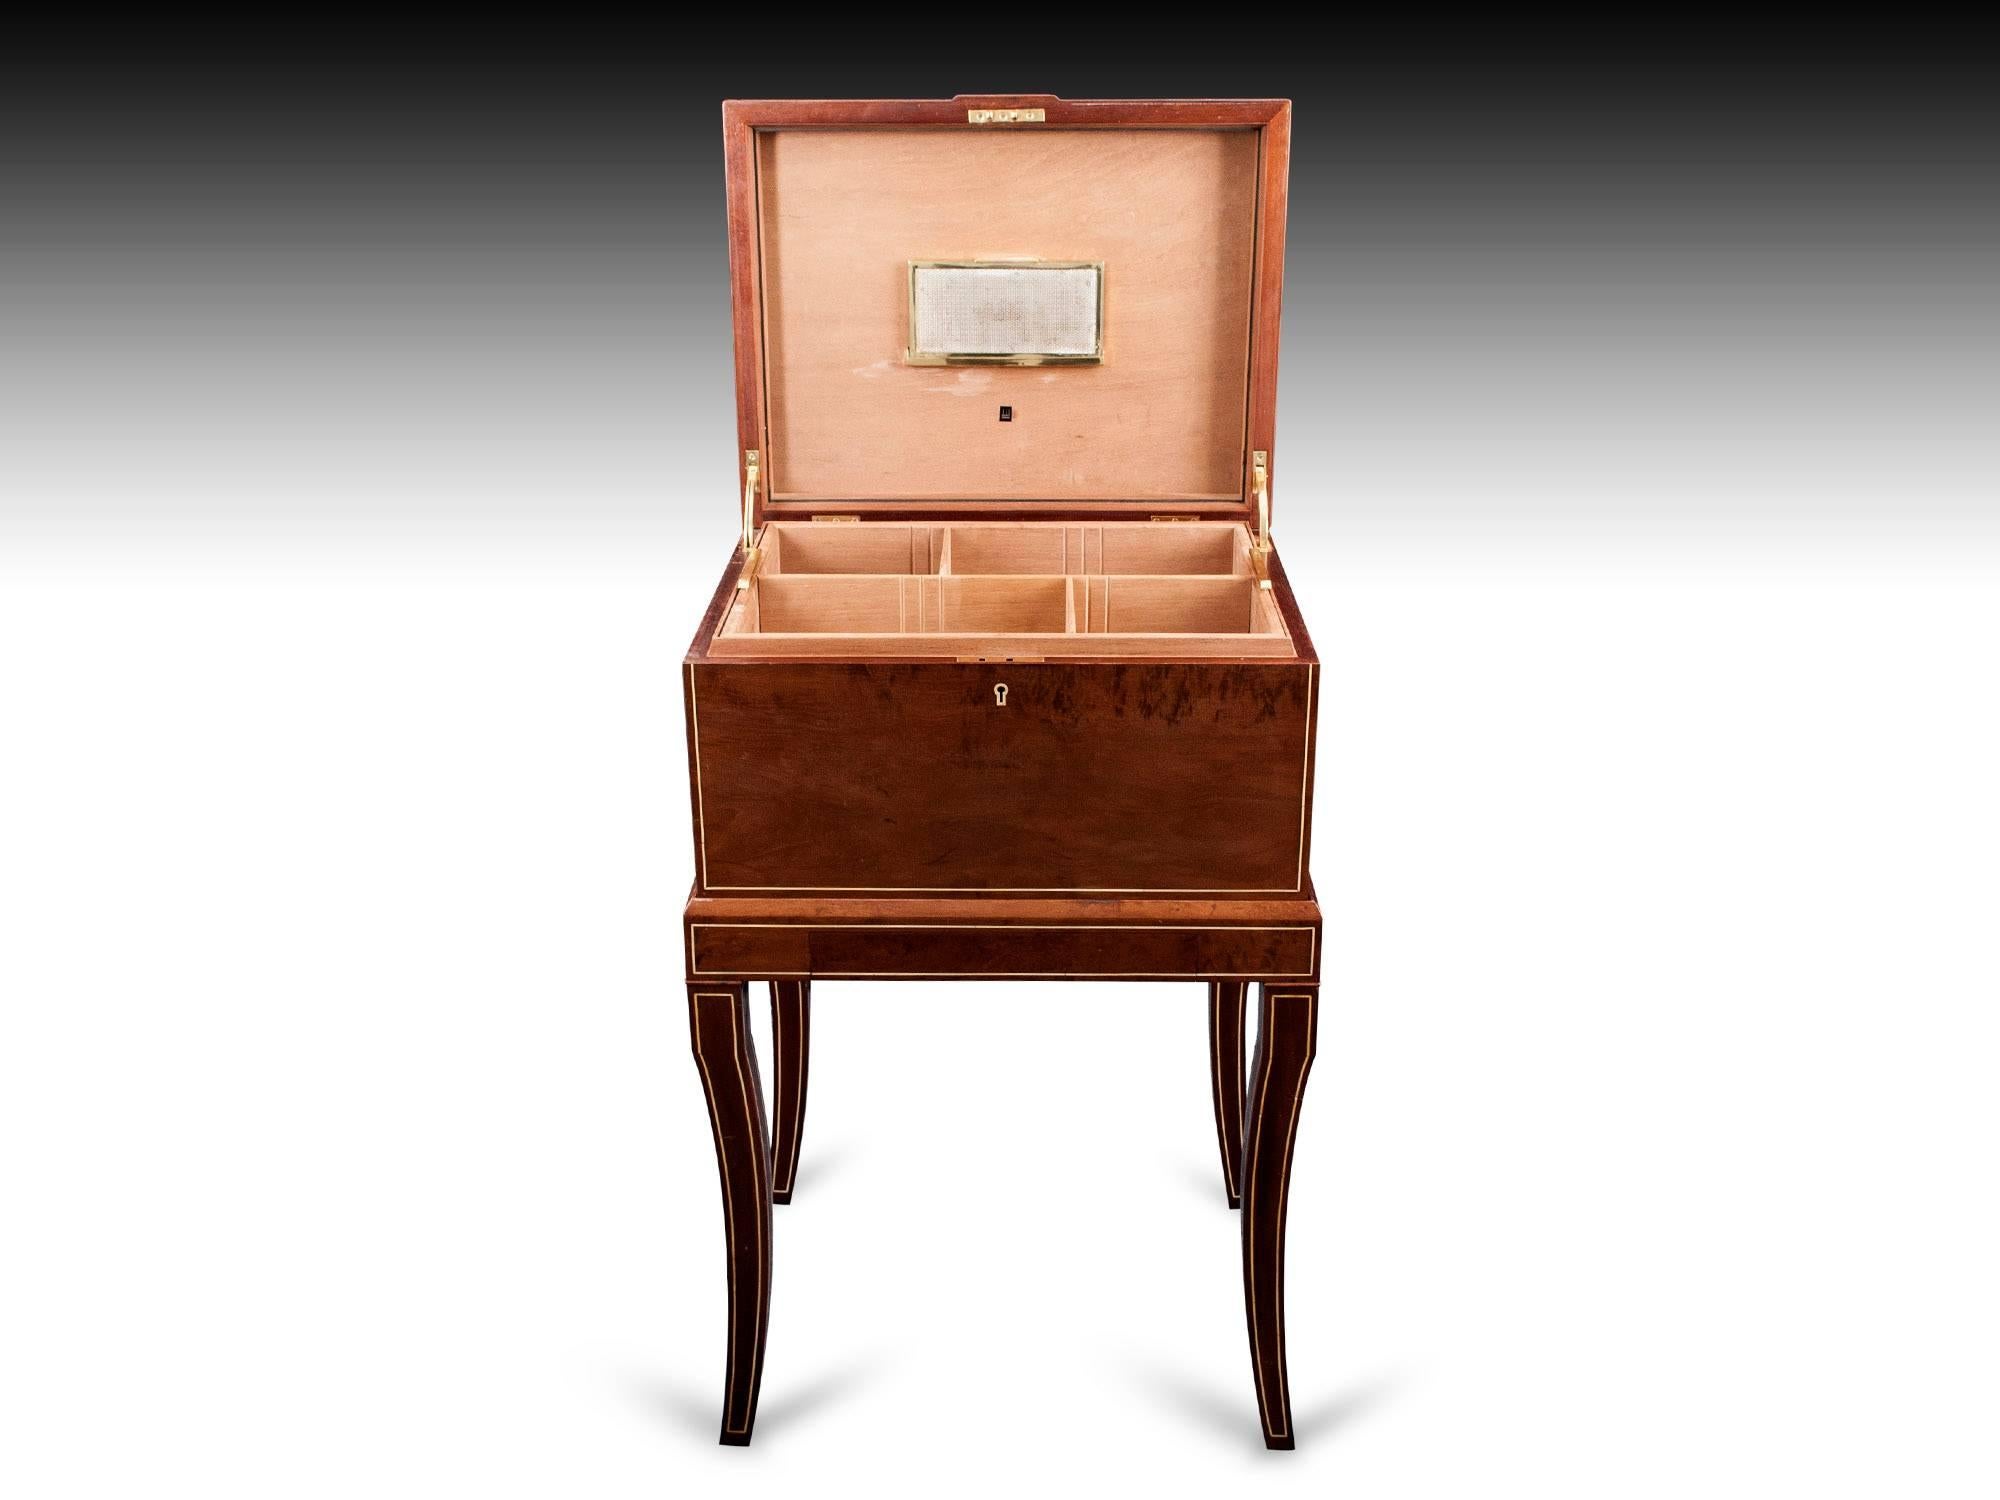 Very Rare 20th Century Figured Red Walnut Cigar Humidor by Dunhill 1